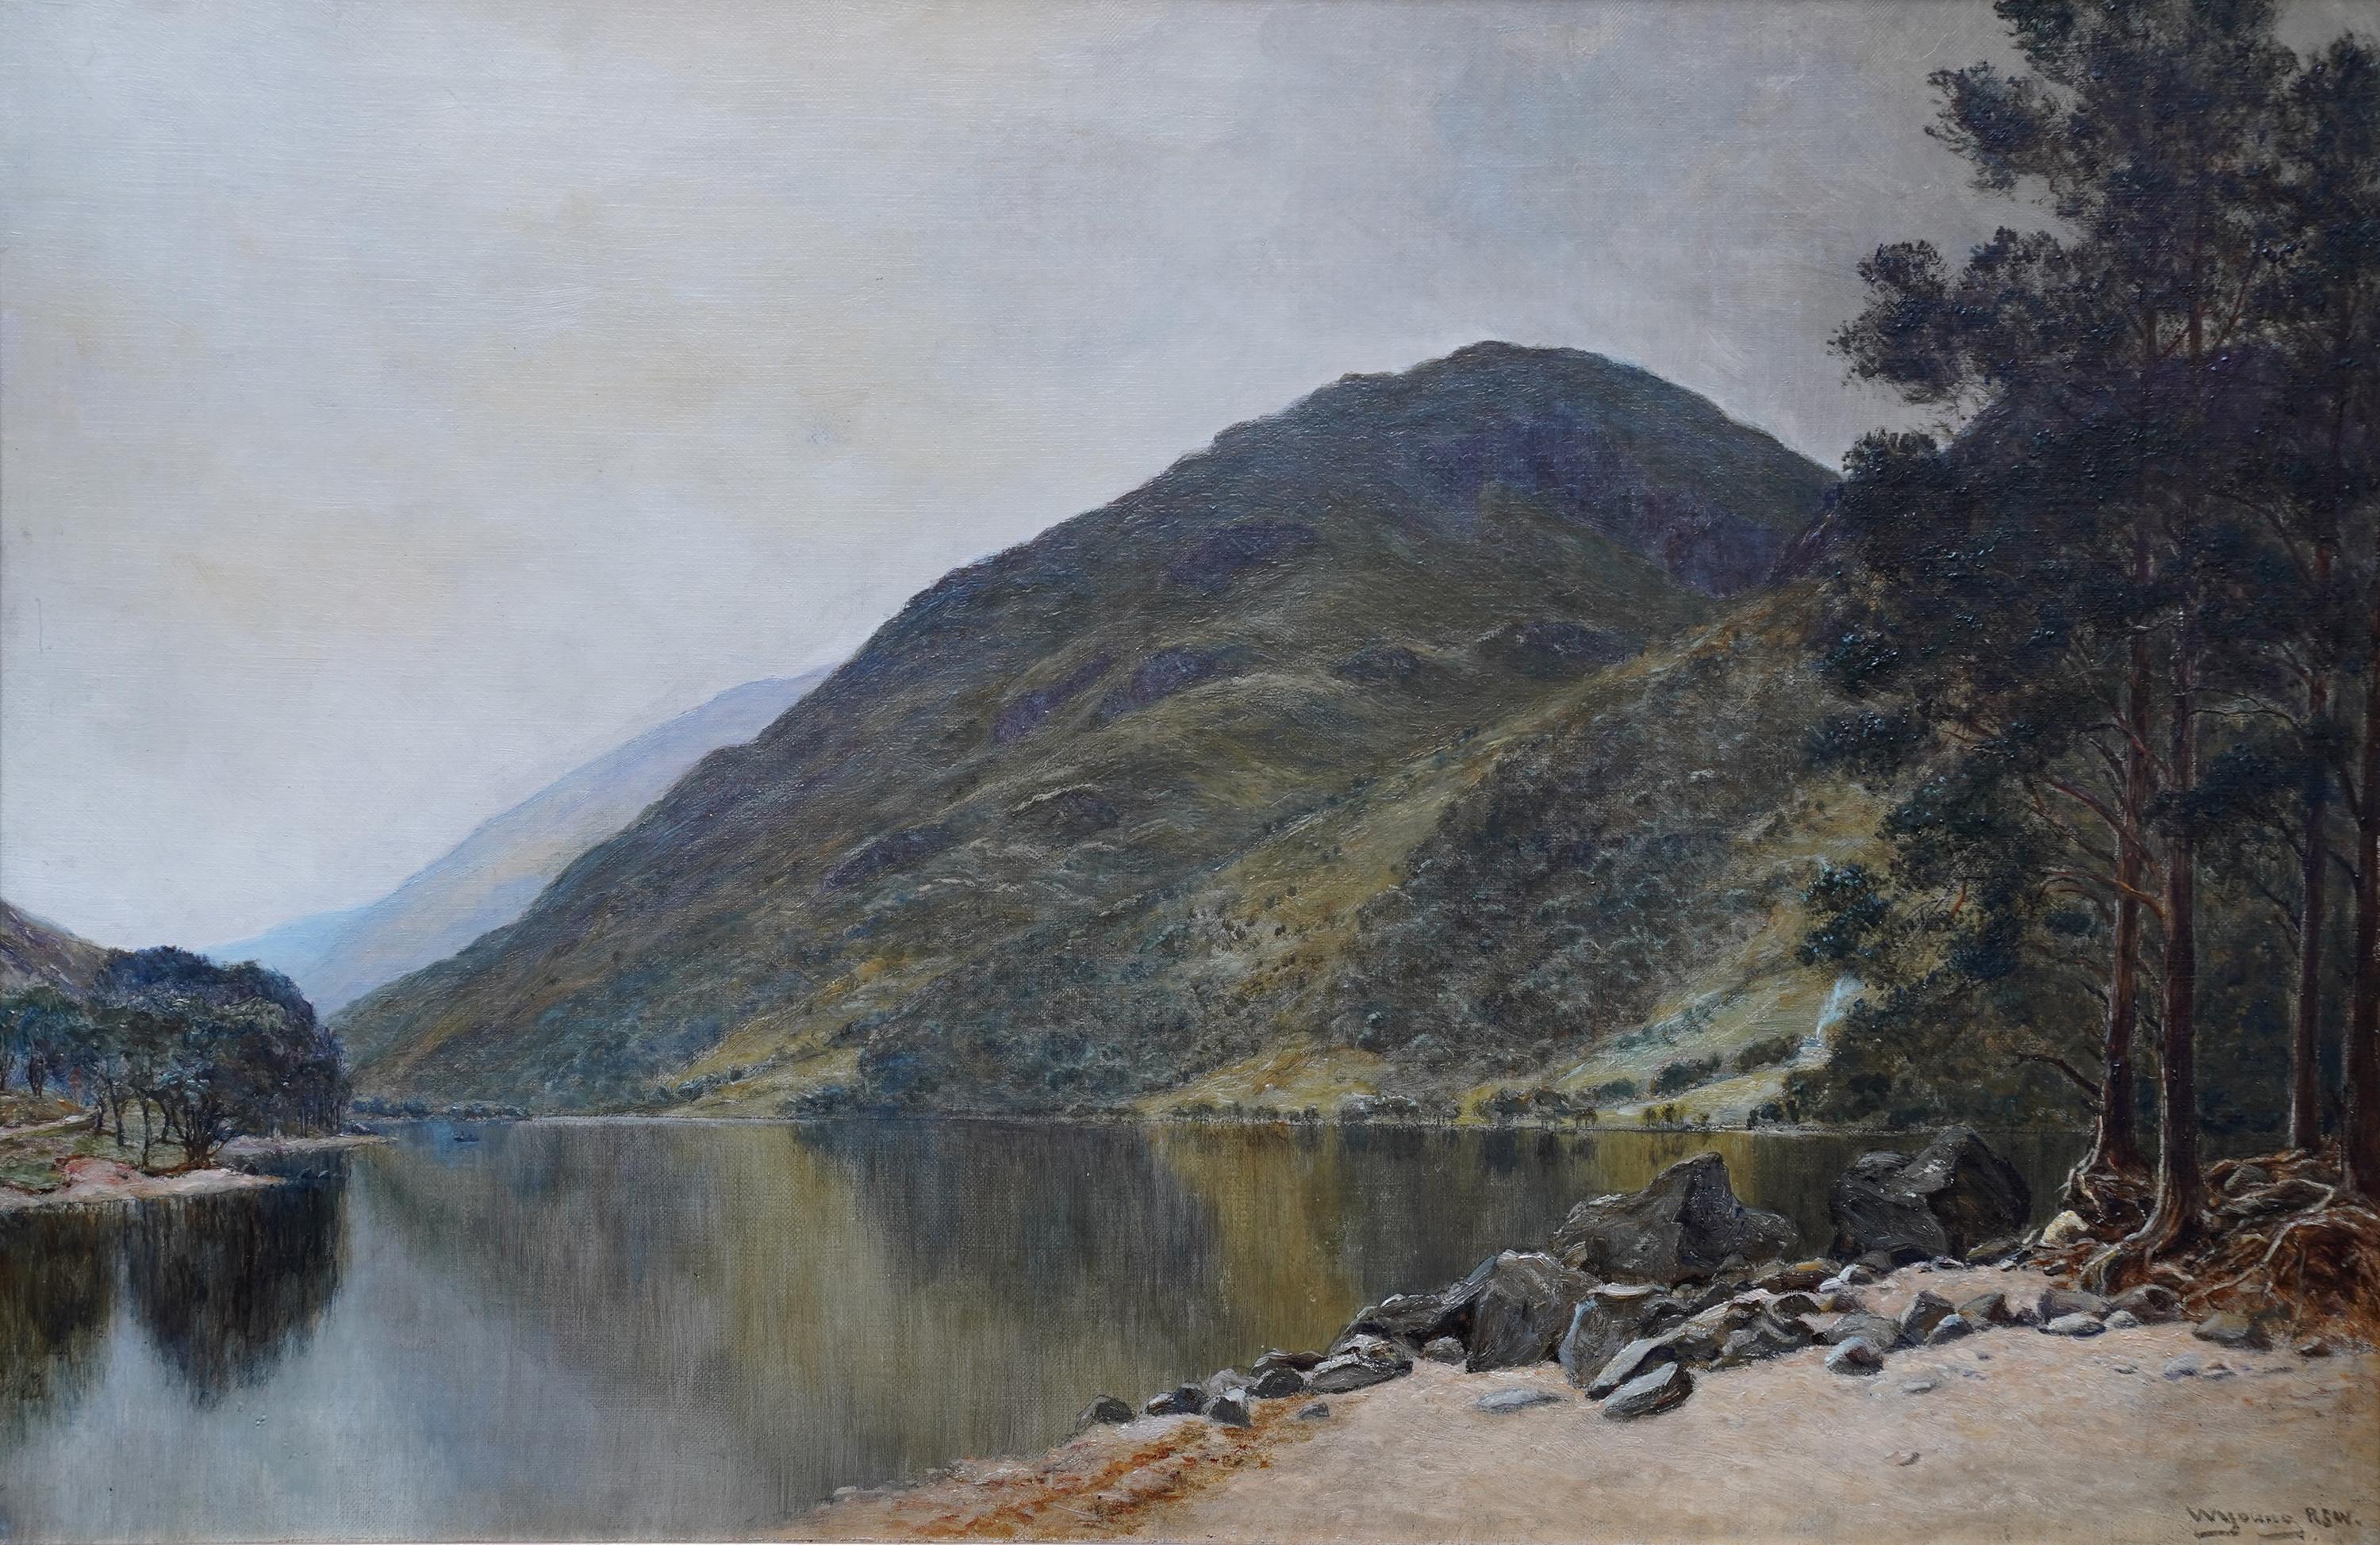 Loch Eck, Scotland - Scottish Edwardian art landscape oil painting  - Painting by William Young